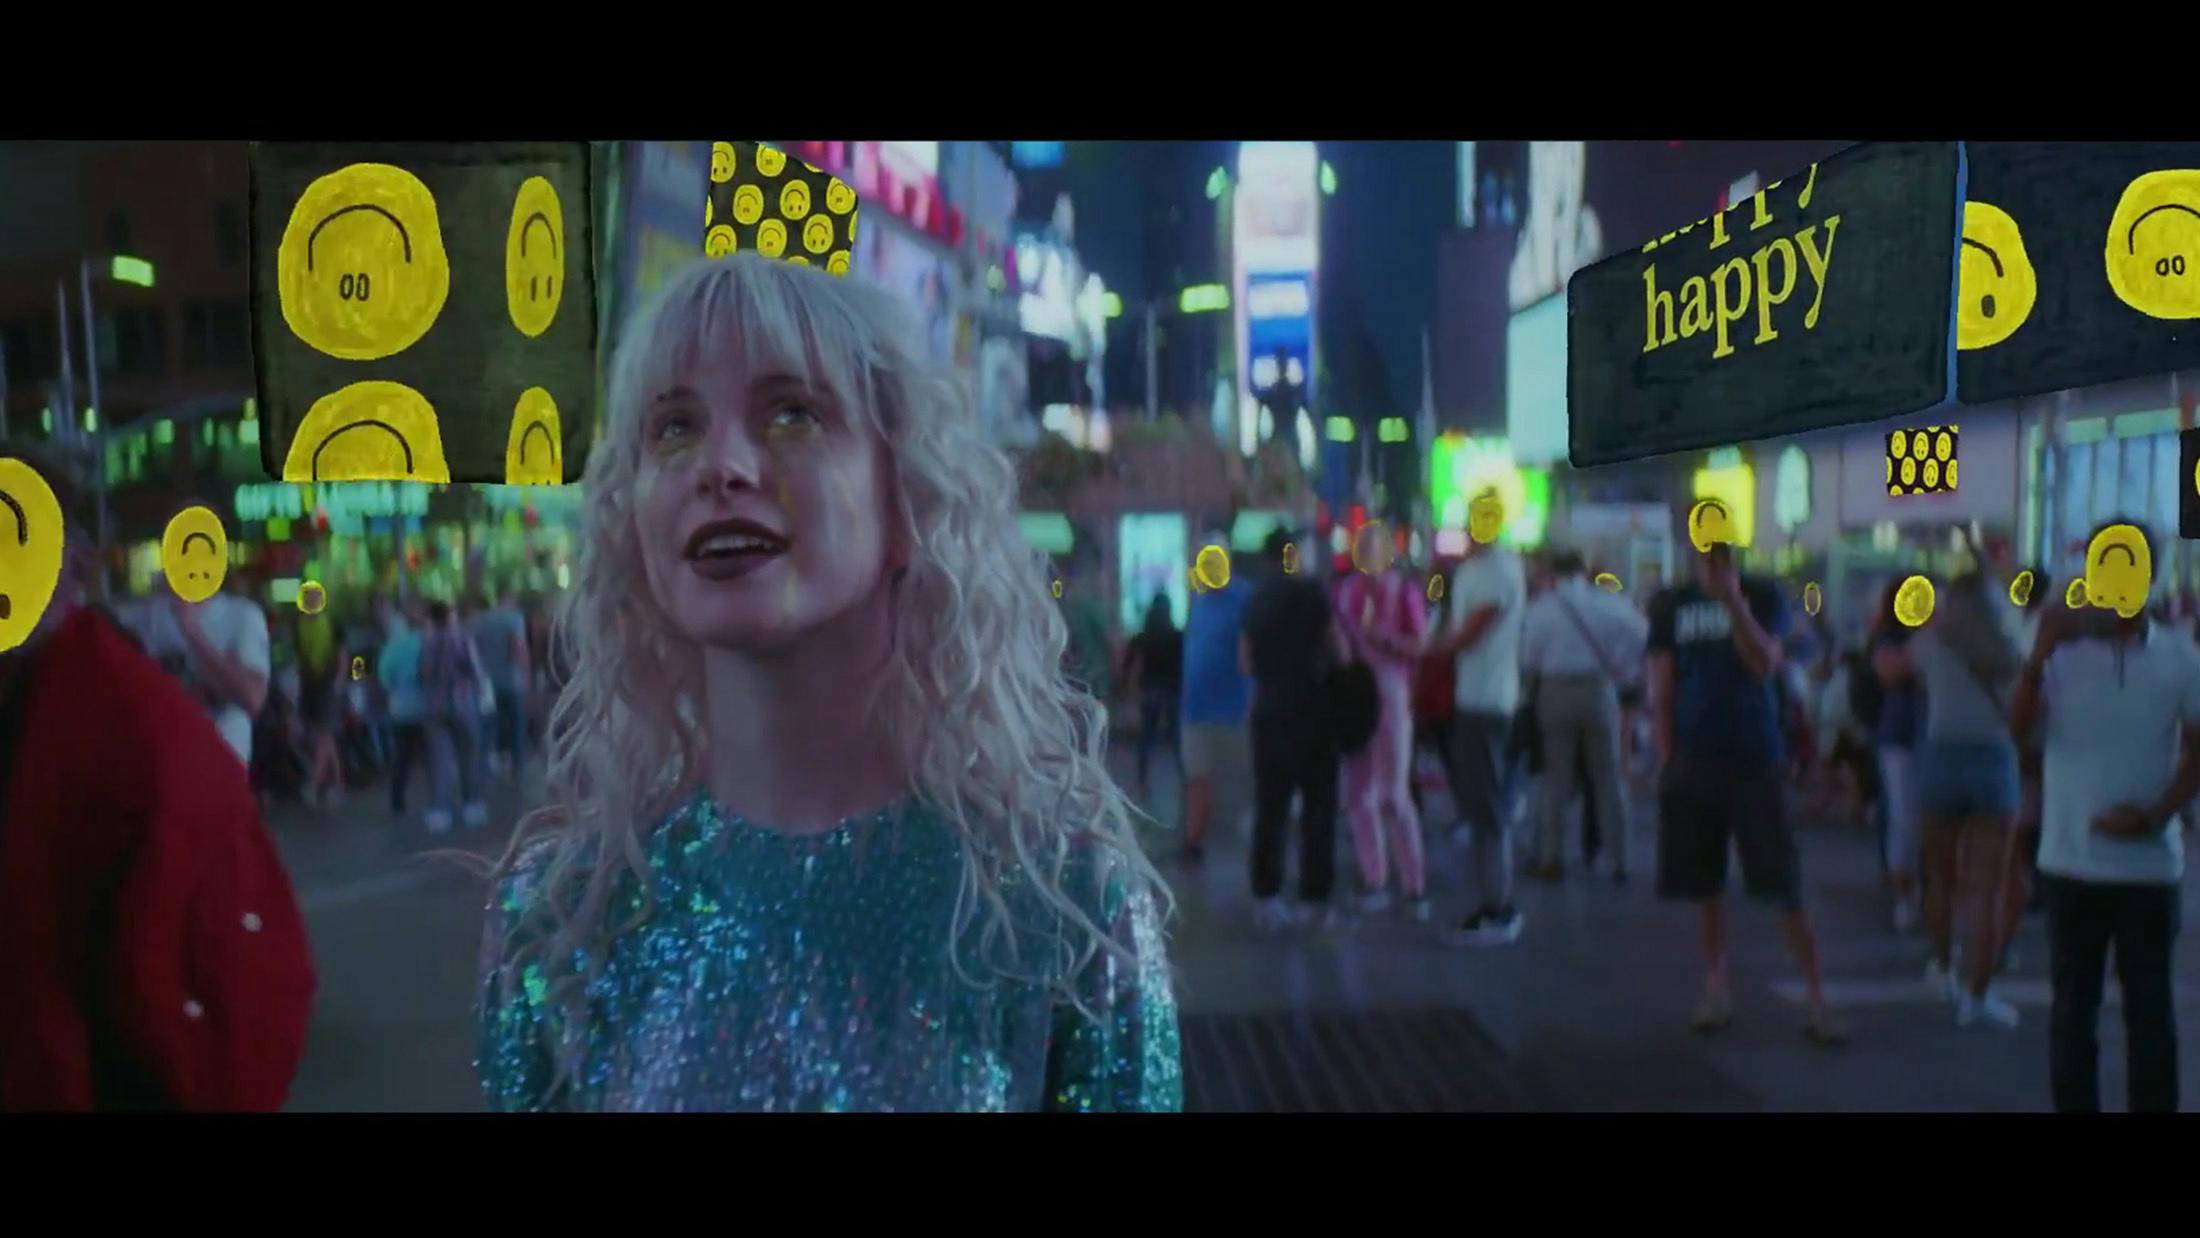 The New Paramore Video Has Landed